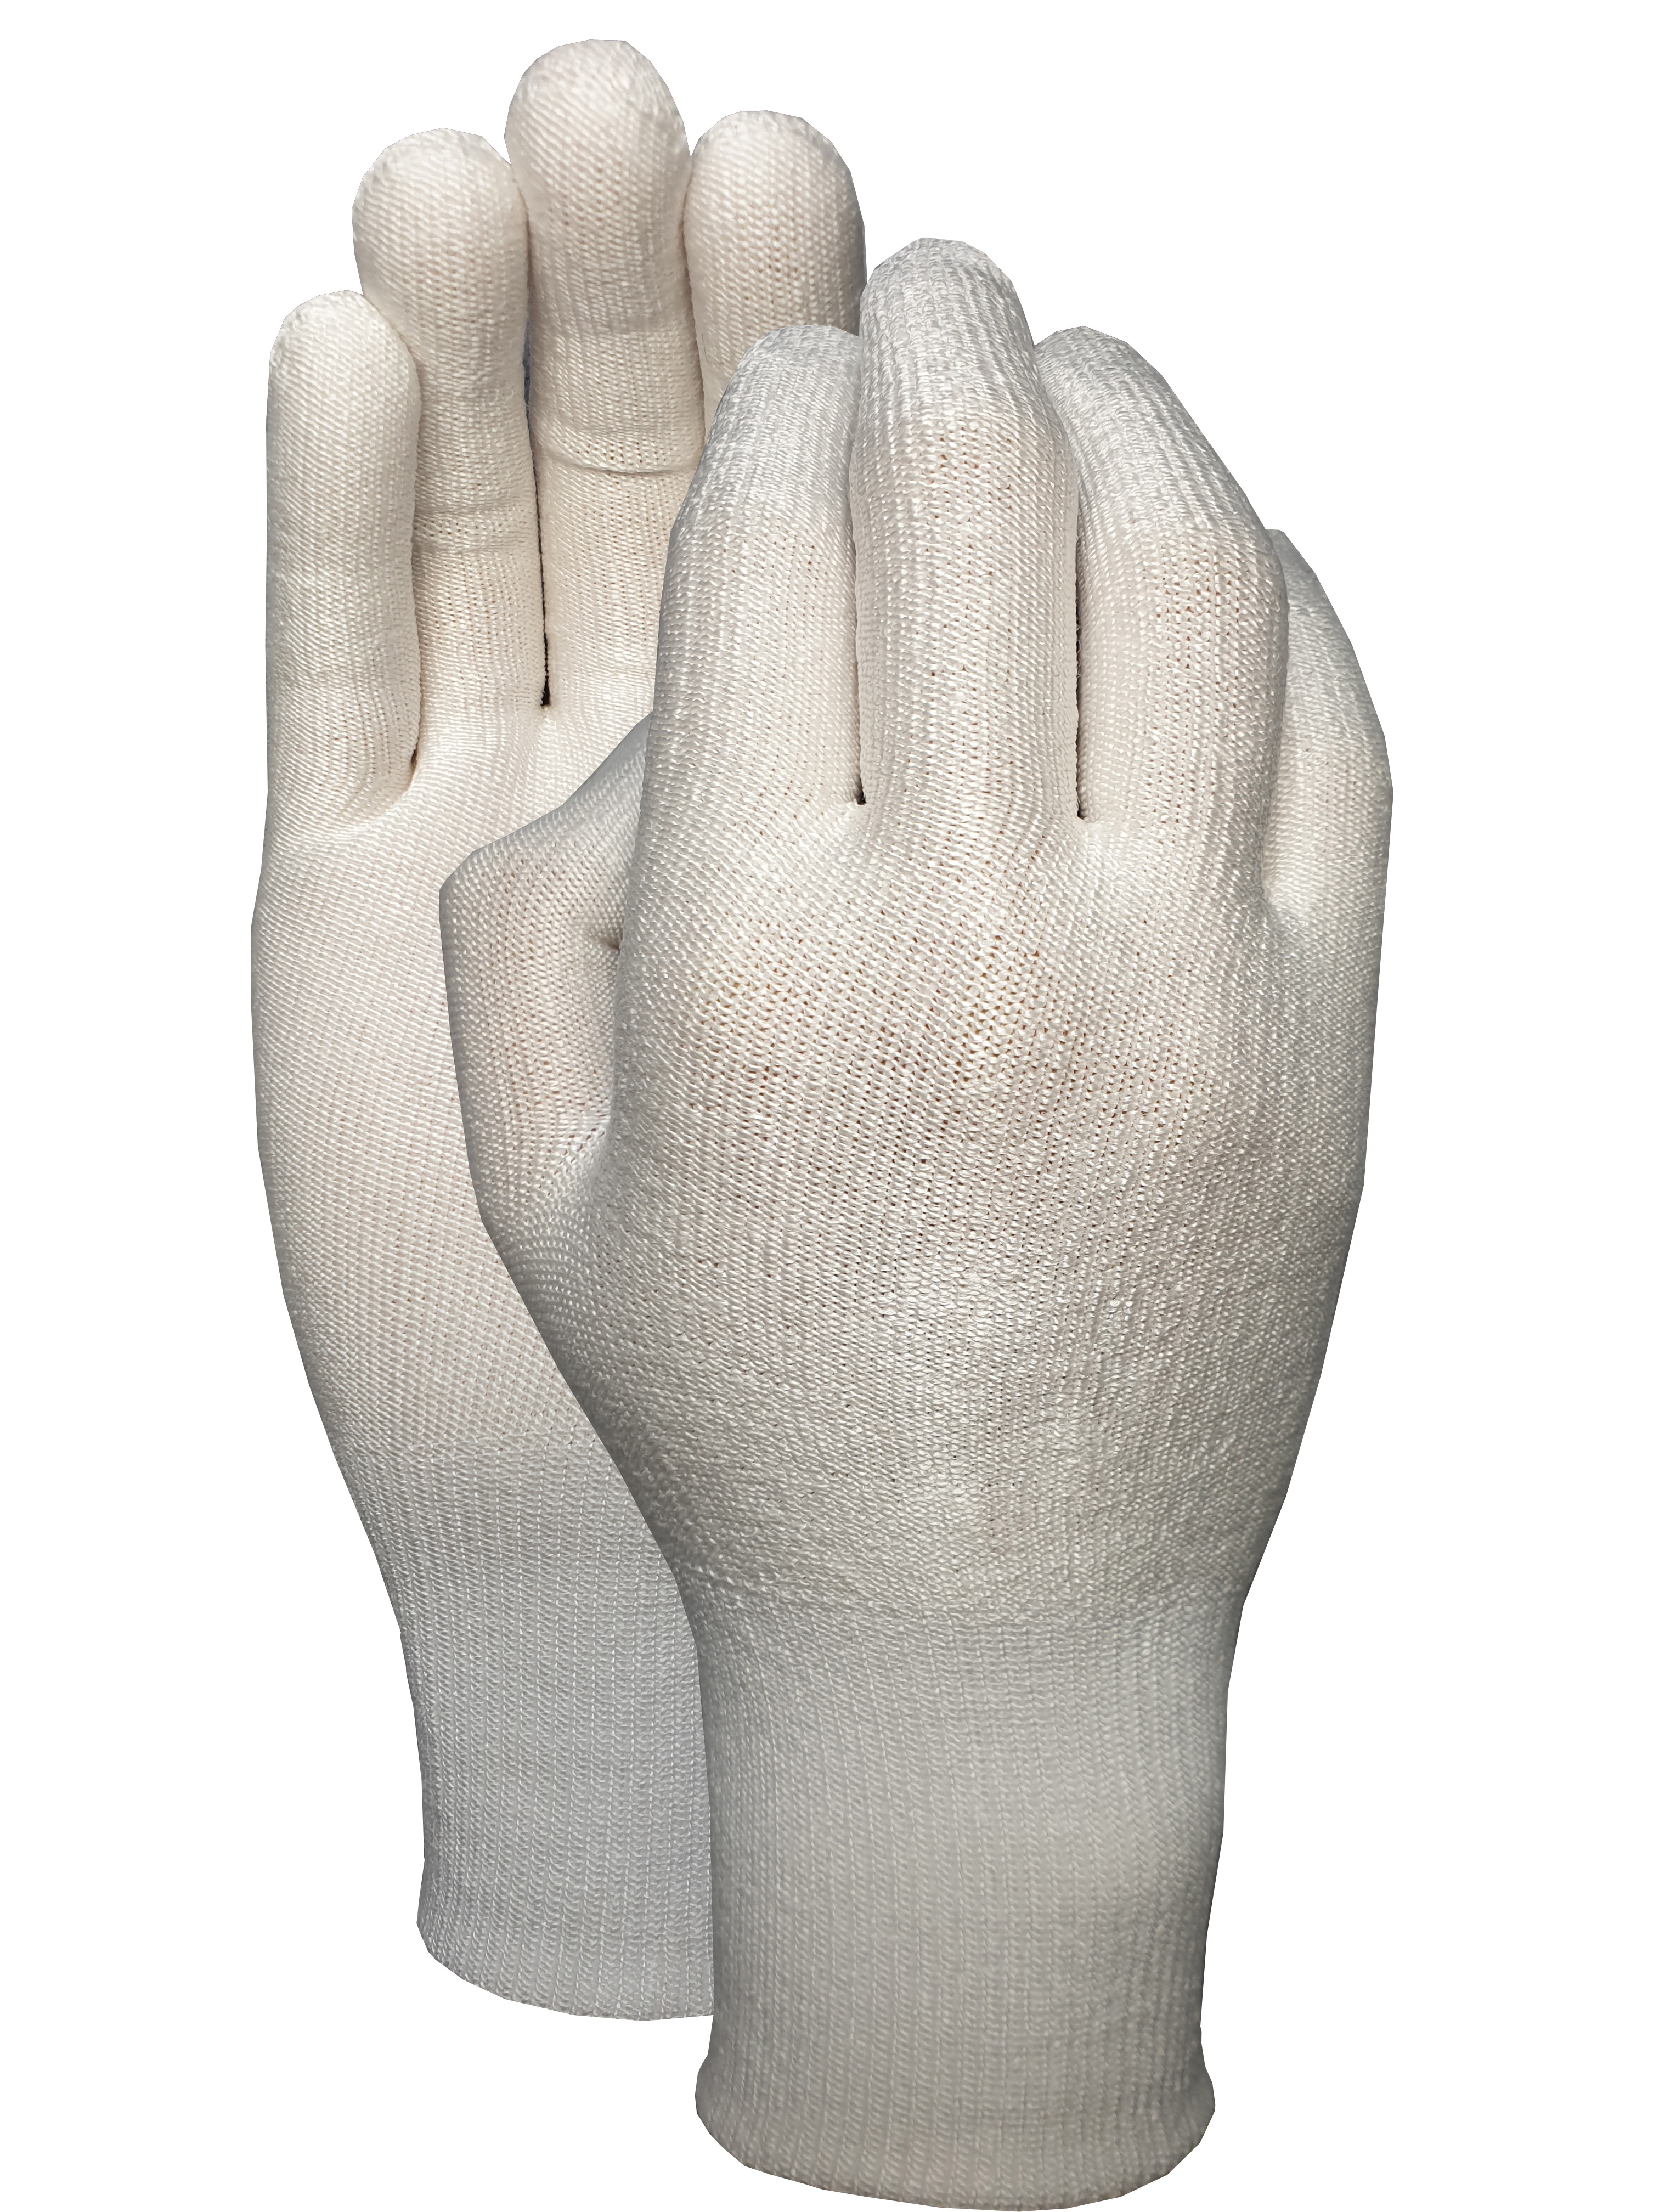 CUT 3 white speckled glove(No coating)